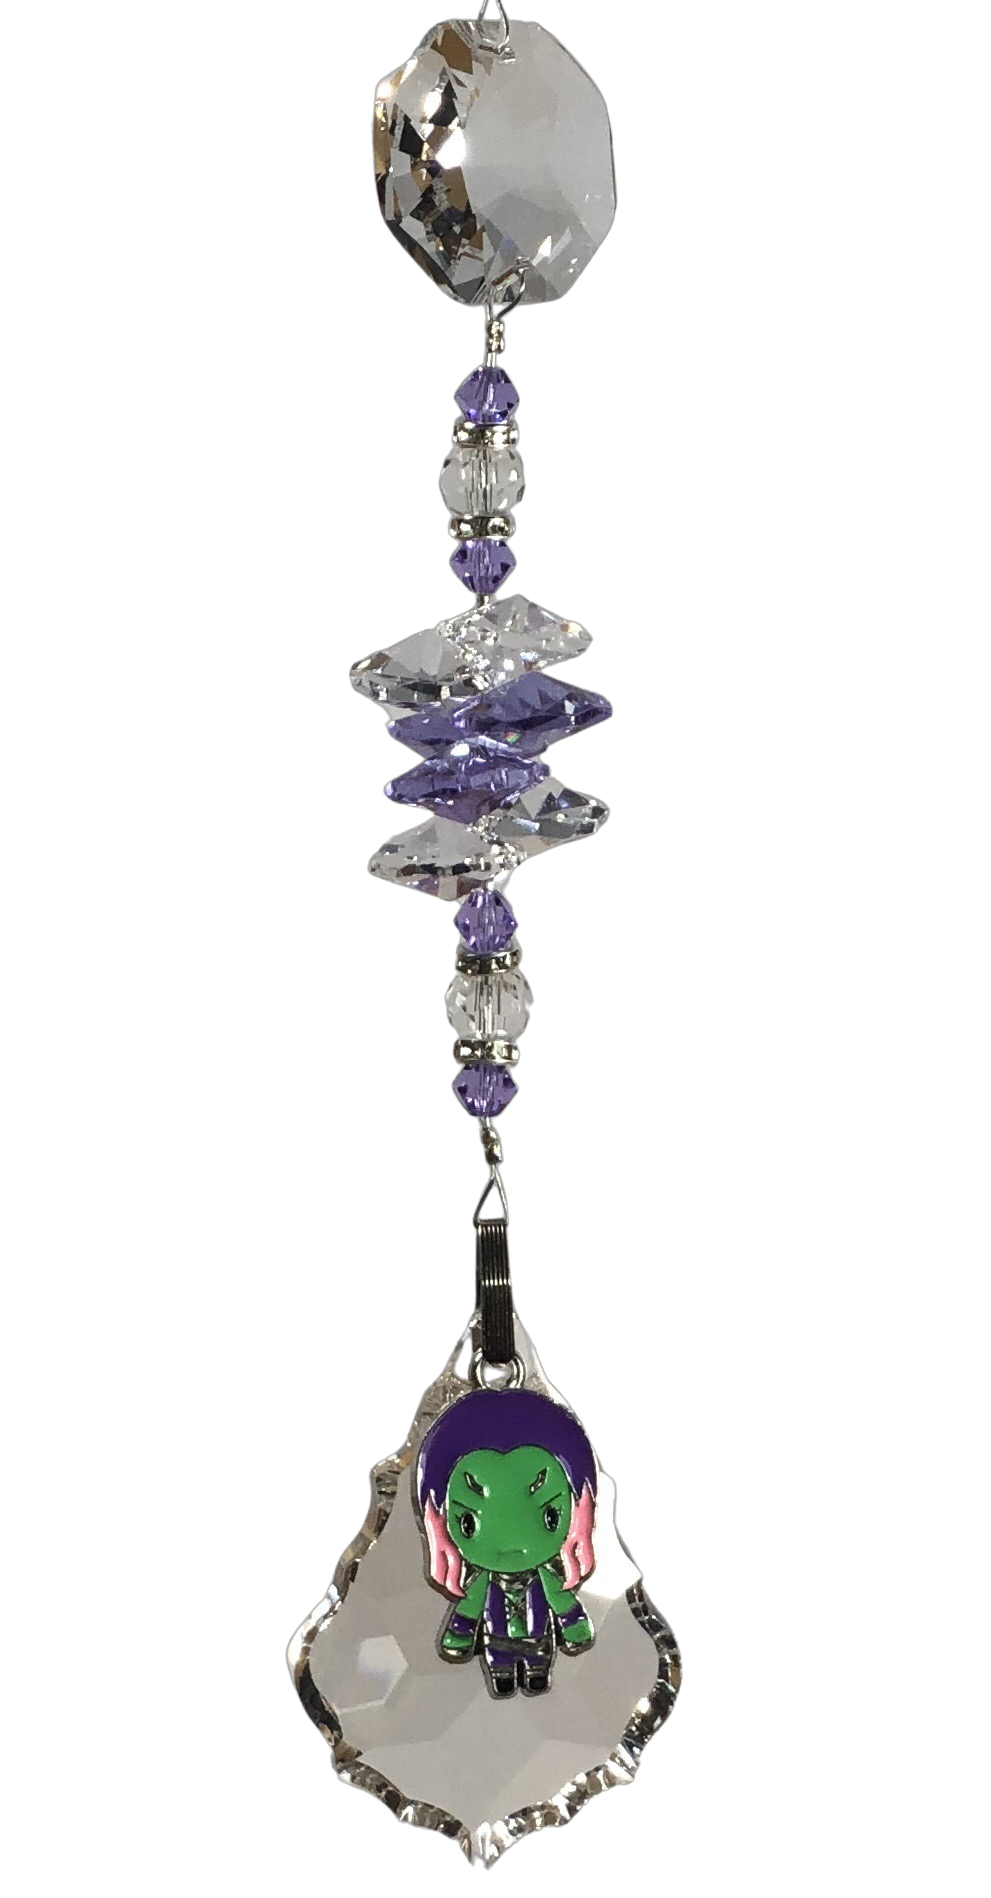 Guardians of the Galaxy - Gamora crystal suncatcher, decorated with 50mm Starburst crystal and amethyst gemstone.